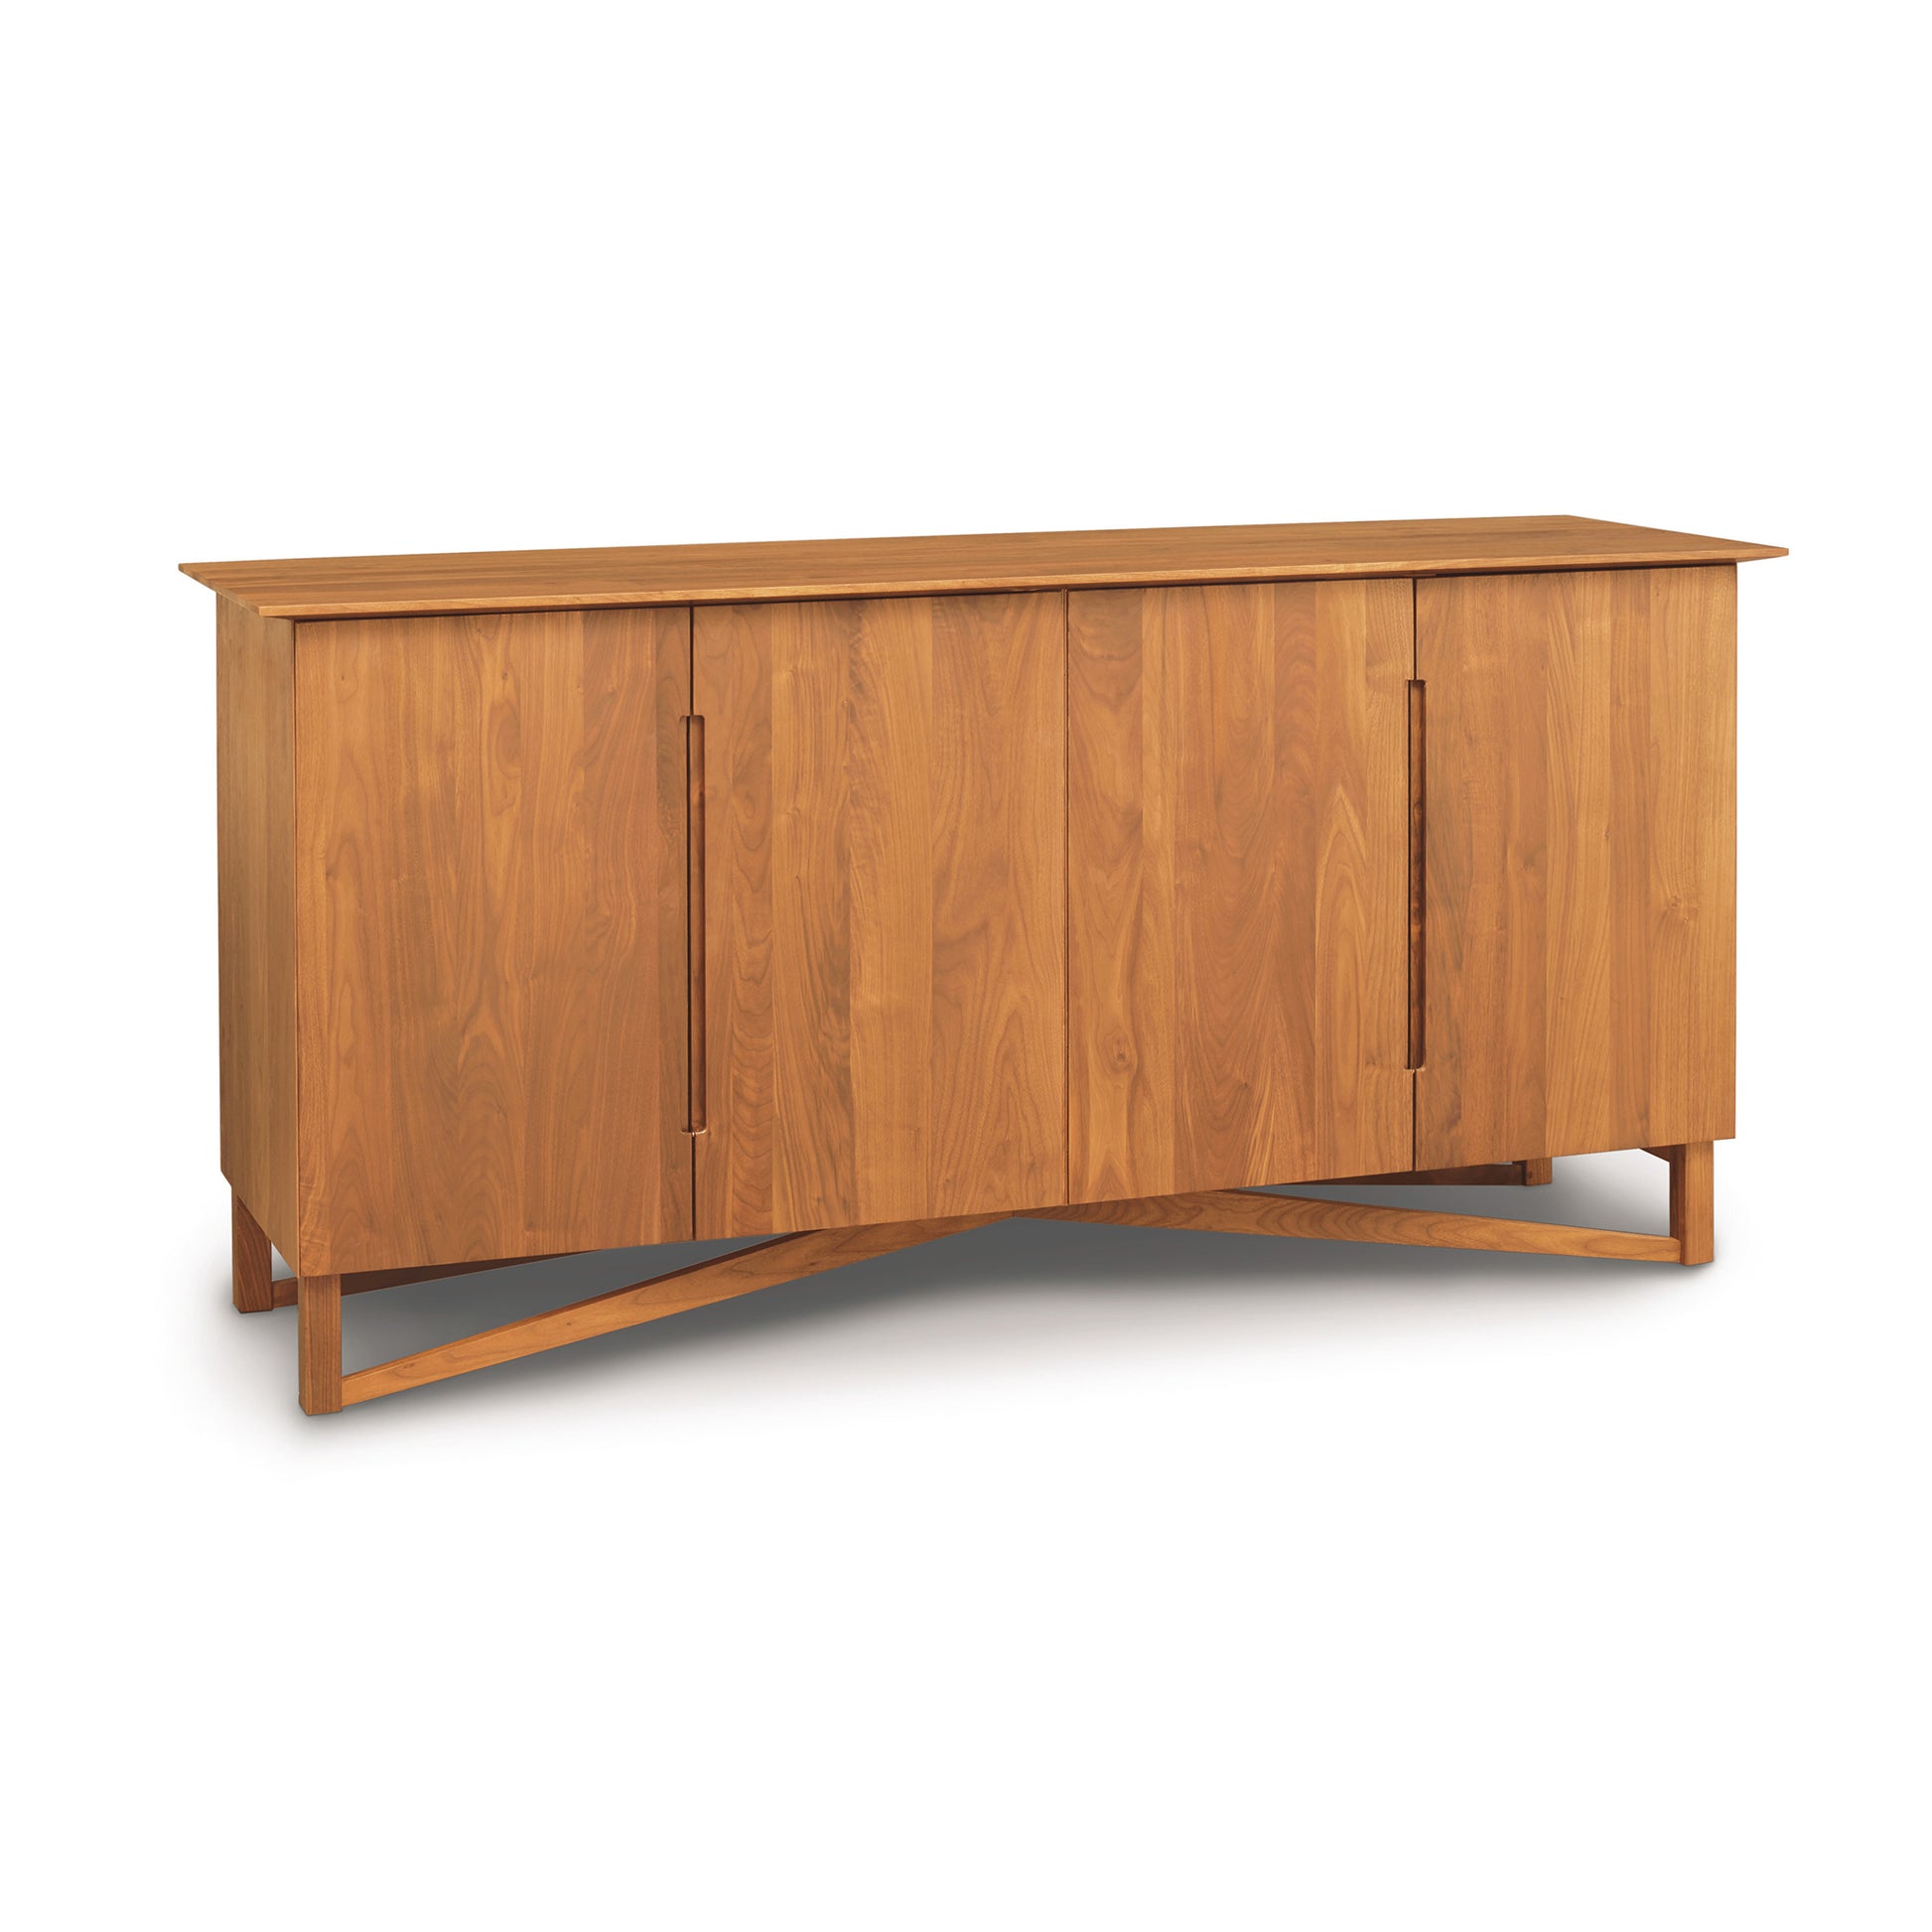 Exeter Buffet from Copeland Furniture, isolated on a white background.